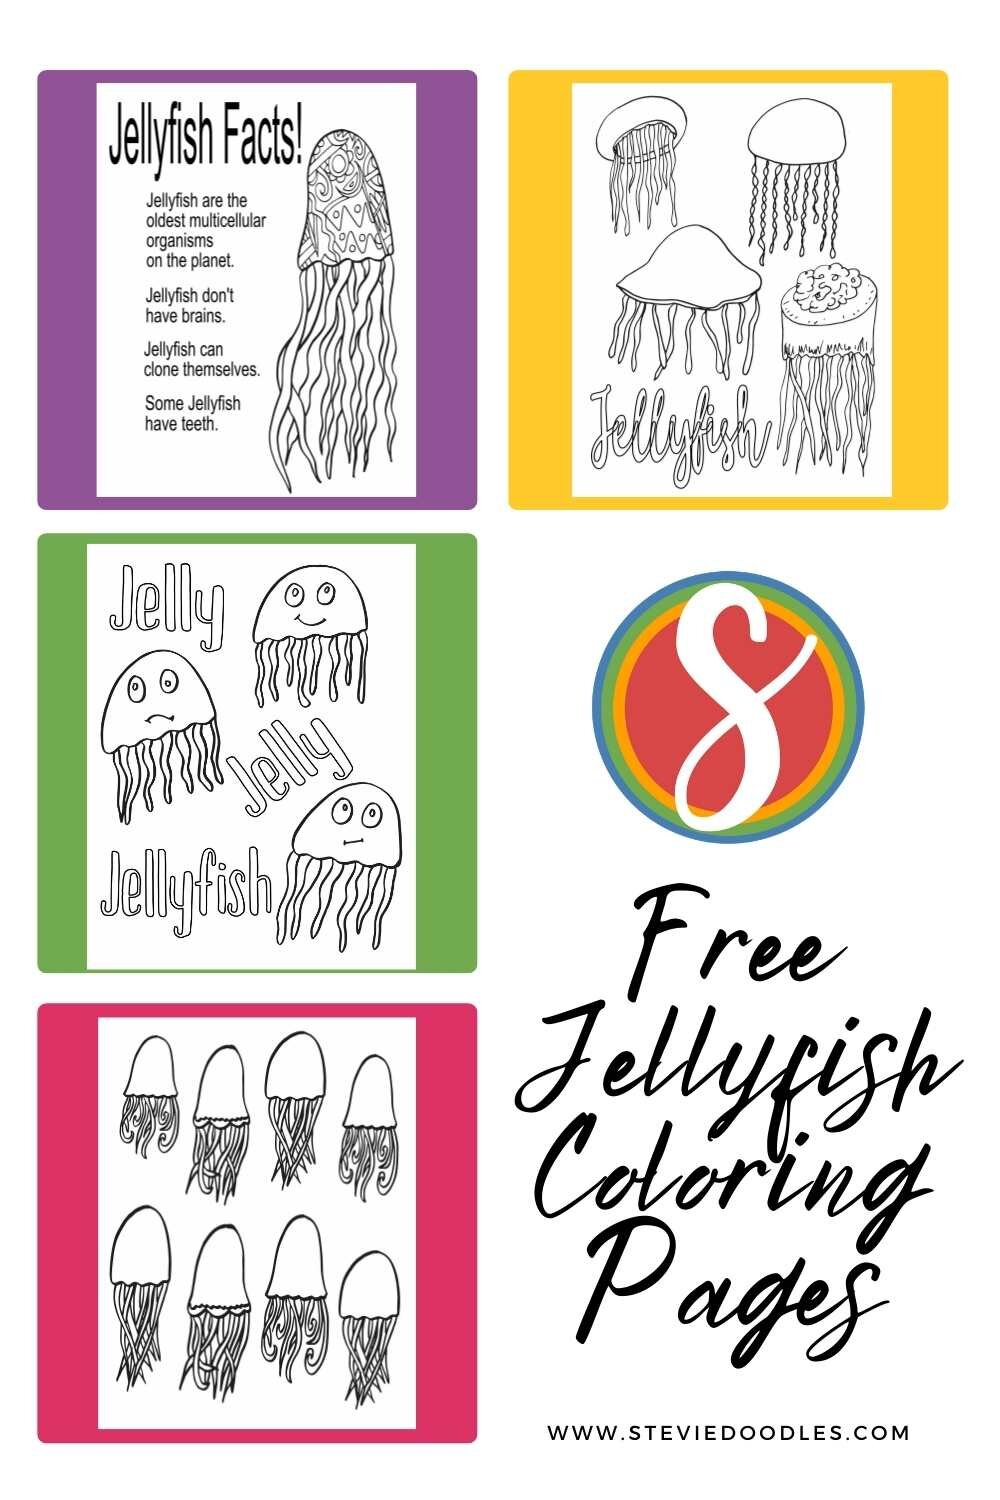 Image is of 4 jellyfish coloring pages, each filled with jellyfish drawings to color and set on a colored background, one yellow, one purple, one green